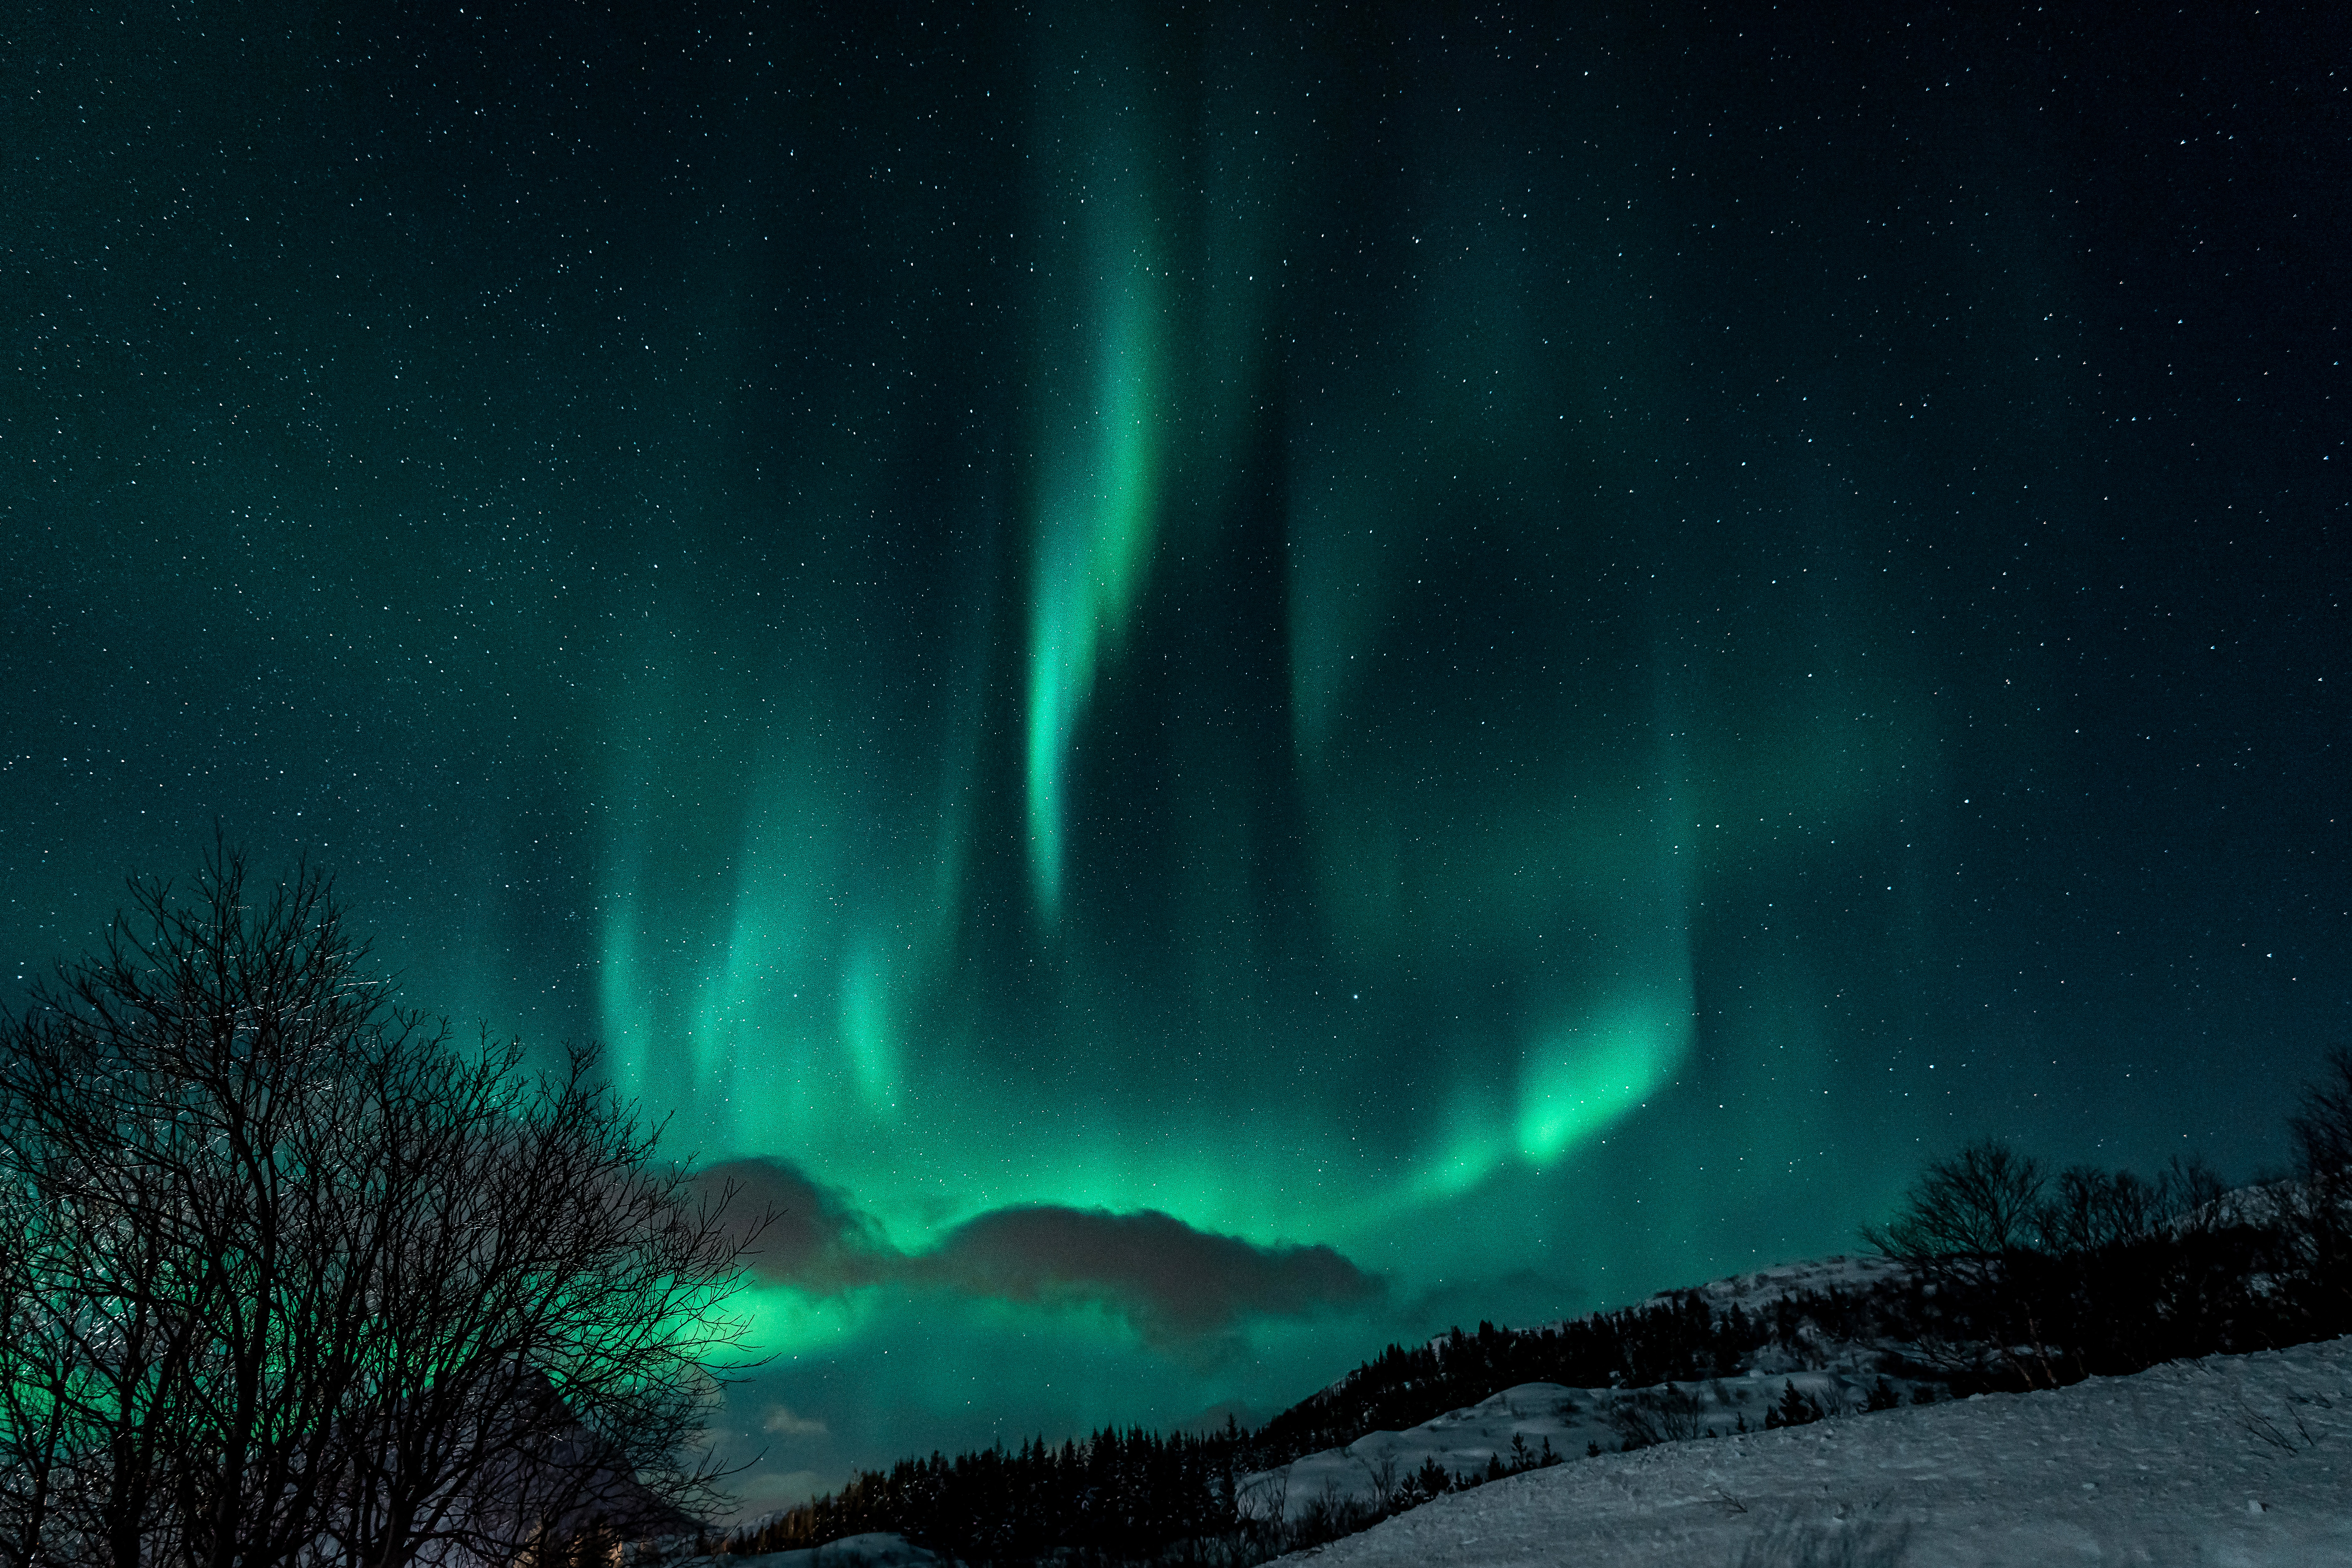 117542 1440x900 PC pictures for free, download aurora borealis, nature, snow, night 1440x900 wallpapers on your desktop